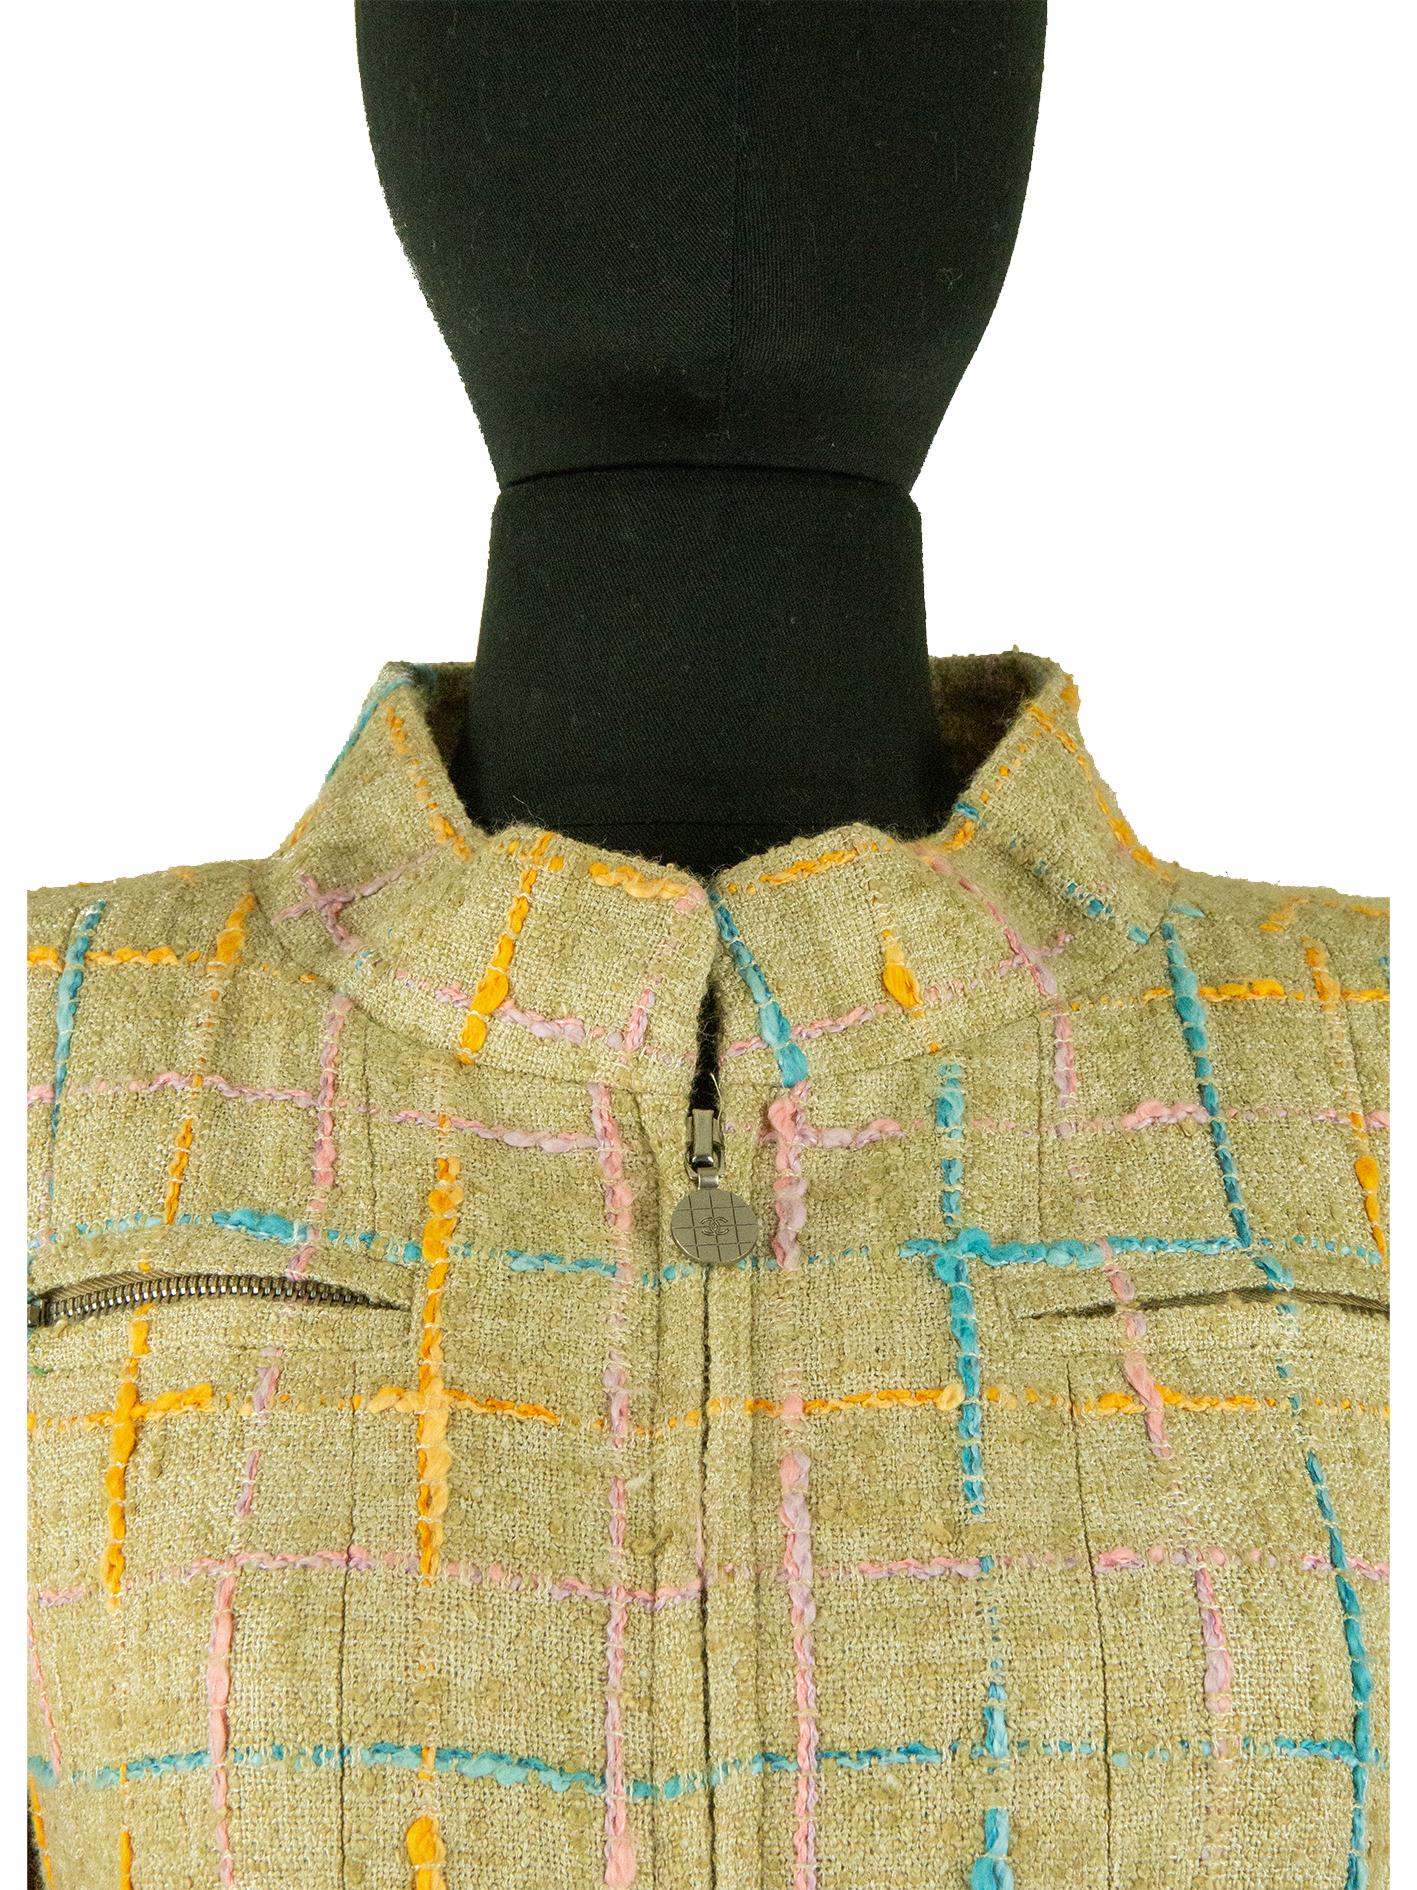 A turn of the century Chanel beige coat with pink, blue and orange checks. This coat features a stand collar and two zip-up pockets on the chest, as well as two welt pockets on the hips. It is also tailored for a more sculpted fit and is fastened